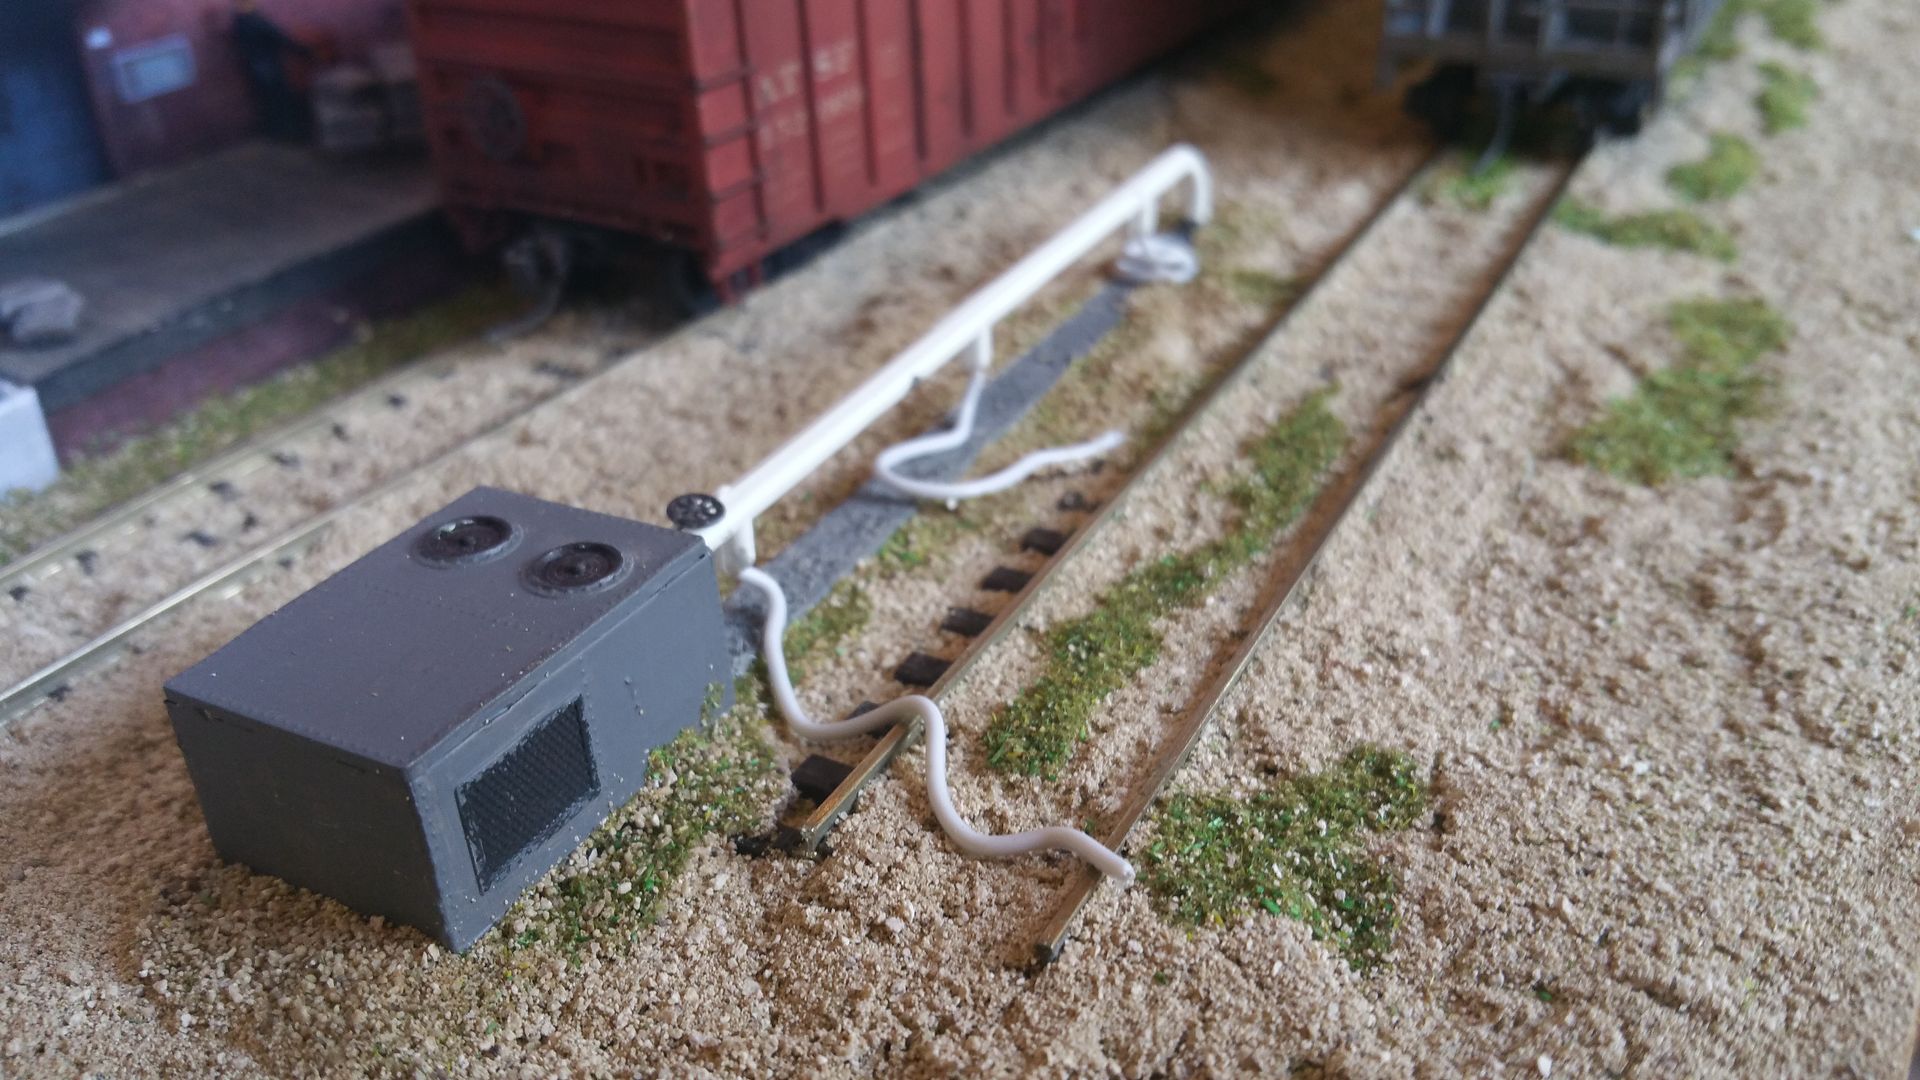 West Allen Street Ho Scale Switching Layout On A Budget Model